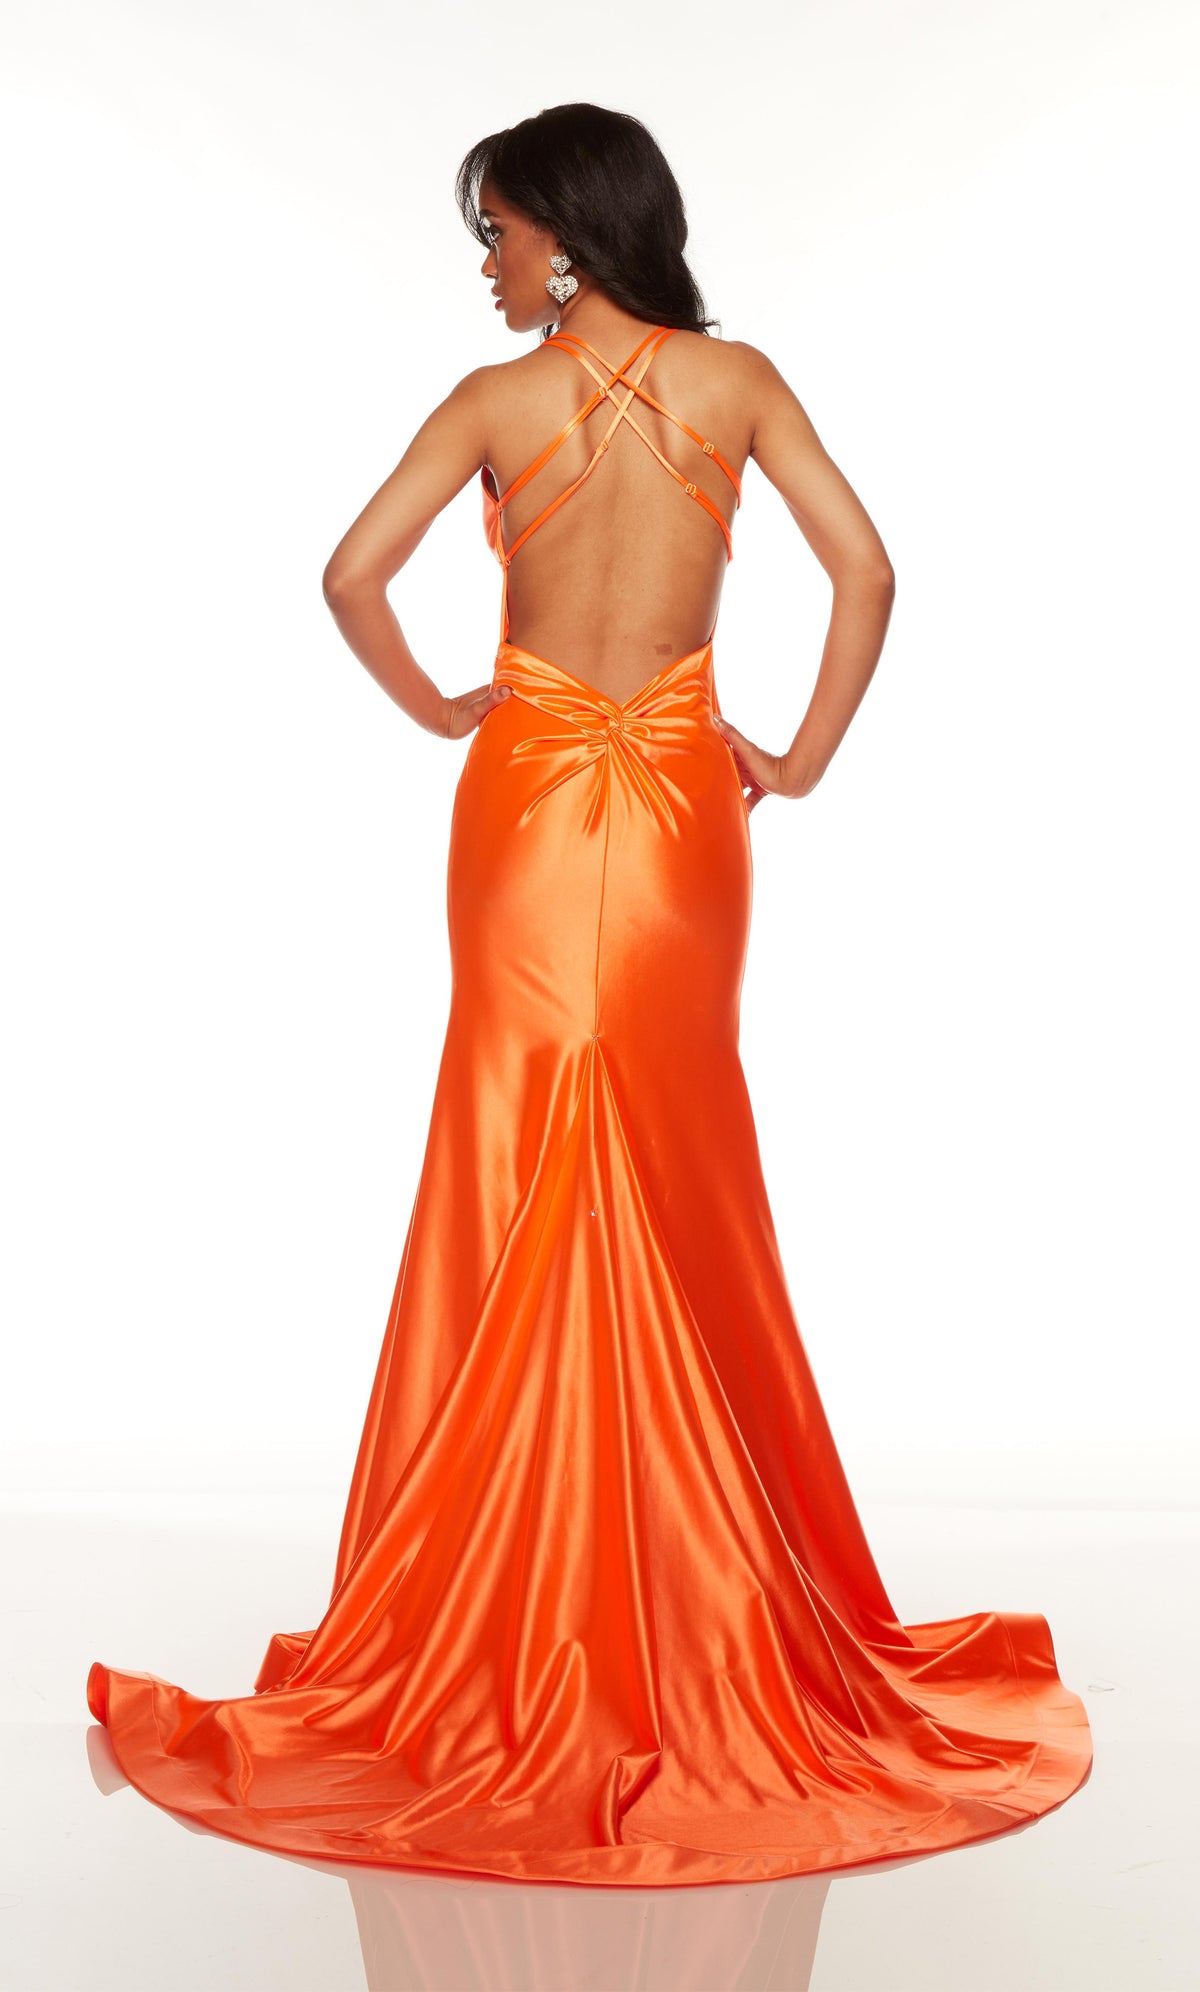 Orange satin gown with a crisscross back and long train.